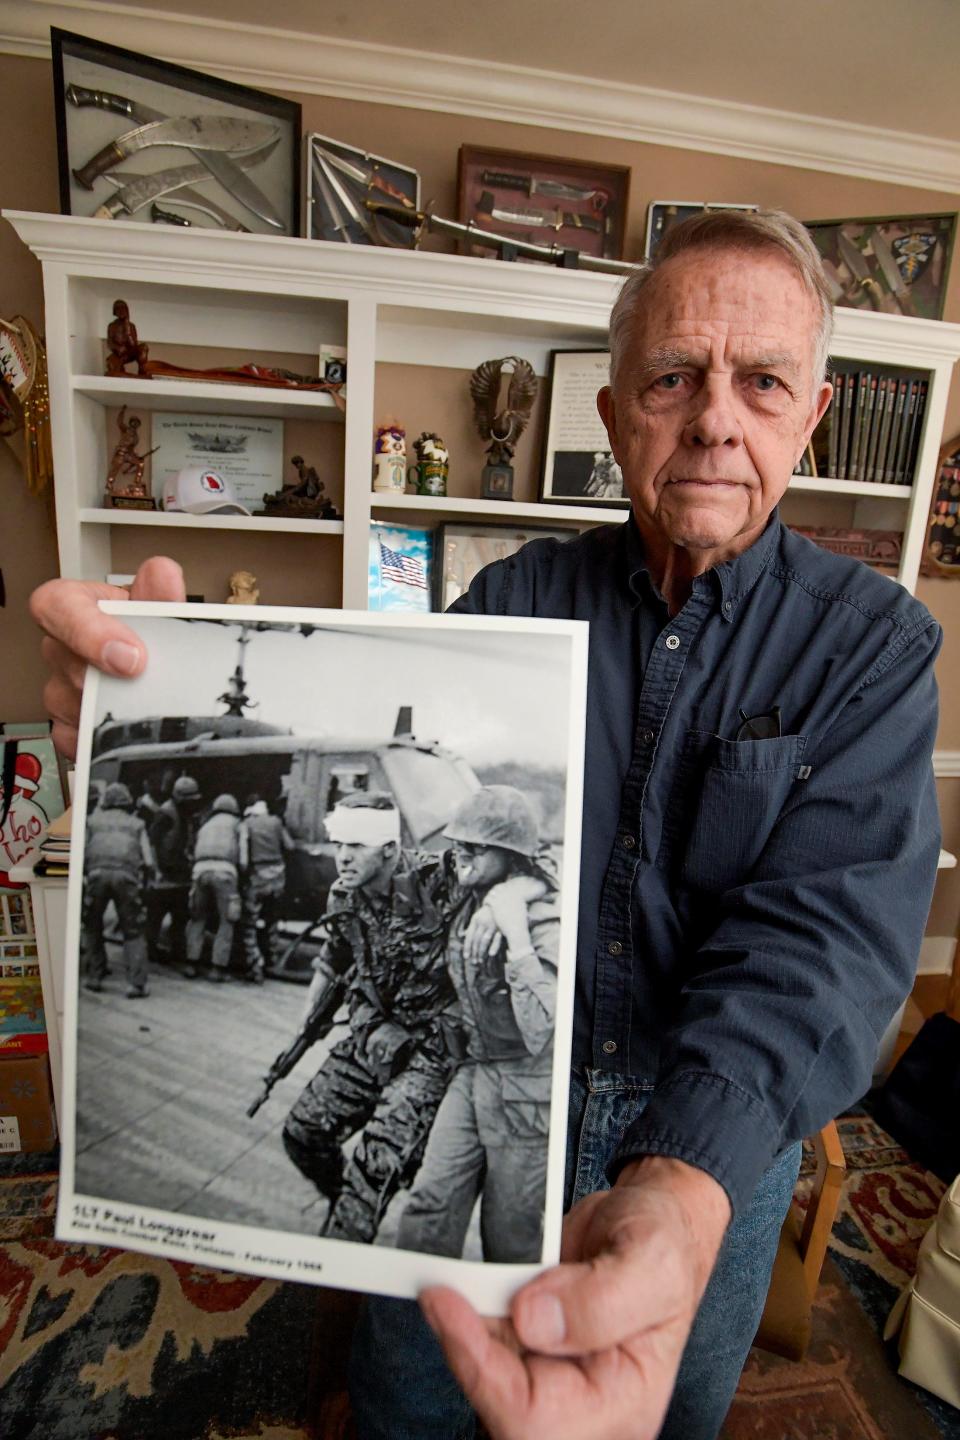 Vietnam veteran Col. Paul Longgrear is seen at his home in Pine Mountain, Ga. on Monday January 23, 2023. Longgrear is one of the few American survivors of the battle of Lang Vei. He is seen in a dramatic photo from the war that he holds.